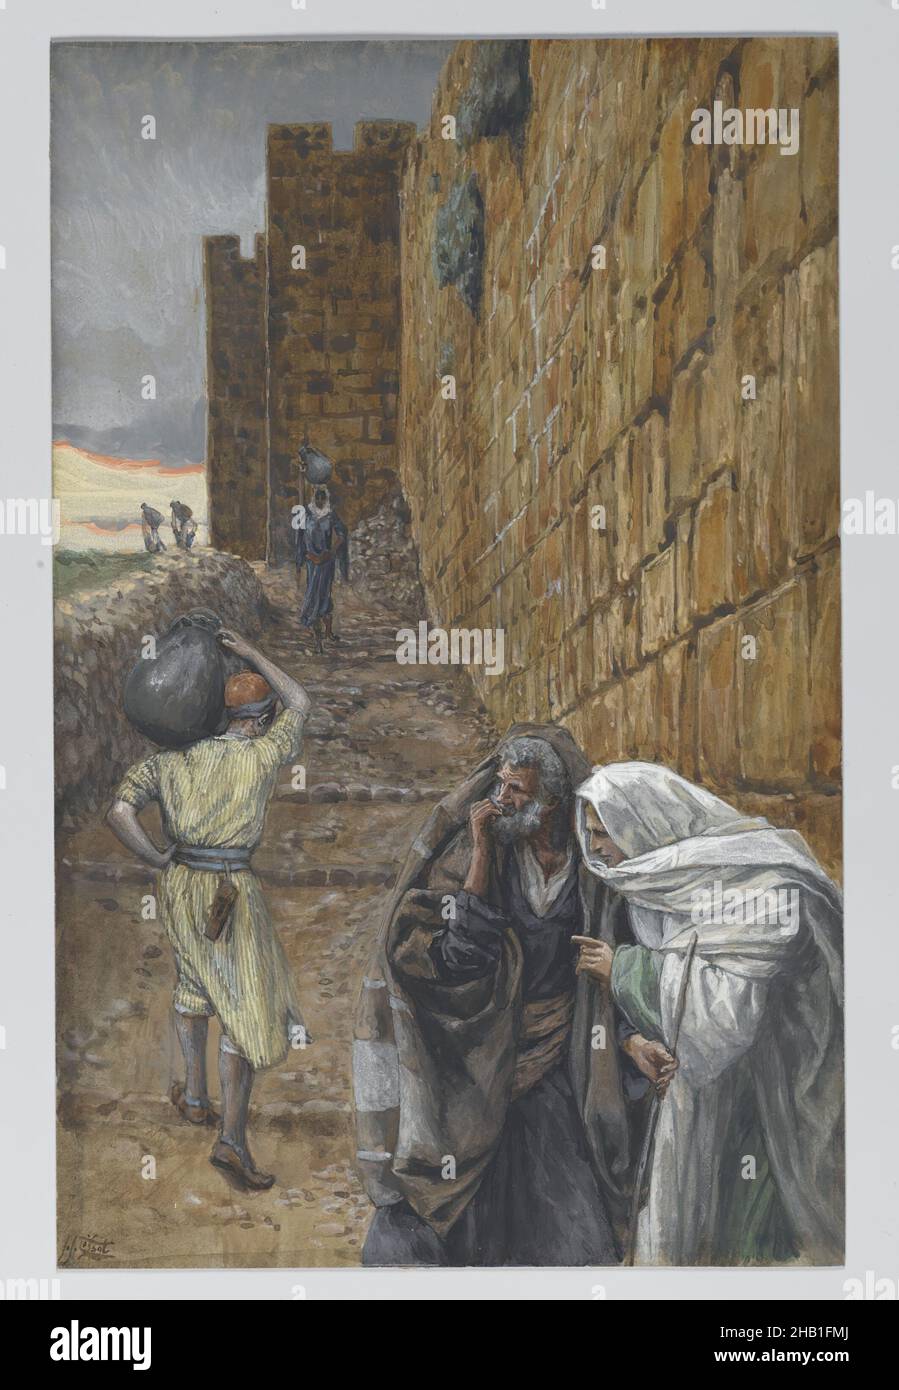 The Man Bearing a Pitcher, L'homme à la cruche, The Life of Our Lord Jesus Christ, La Vie de Notre-Seigneur Jésus-Christ, James Tissot, French, 1836-1902, Opaque watercolor over graphite on gray wove paper, France, 1886-1894, Image: 9 7/8 x 6 5/16 in., 25.1 x 16 cm, city wall, doubt, figures, French, French artist, Jerusalem, Jesus, John, Luke 22:10, Mark 14:12-17, miracle, passover, Peter, pitcher, religious, religious art, stairs, stone, street scene, towers, twilight, water vessel, watercolor, wine vessel, work on paper Stock Photo